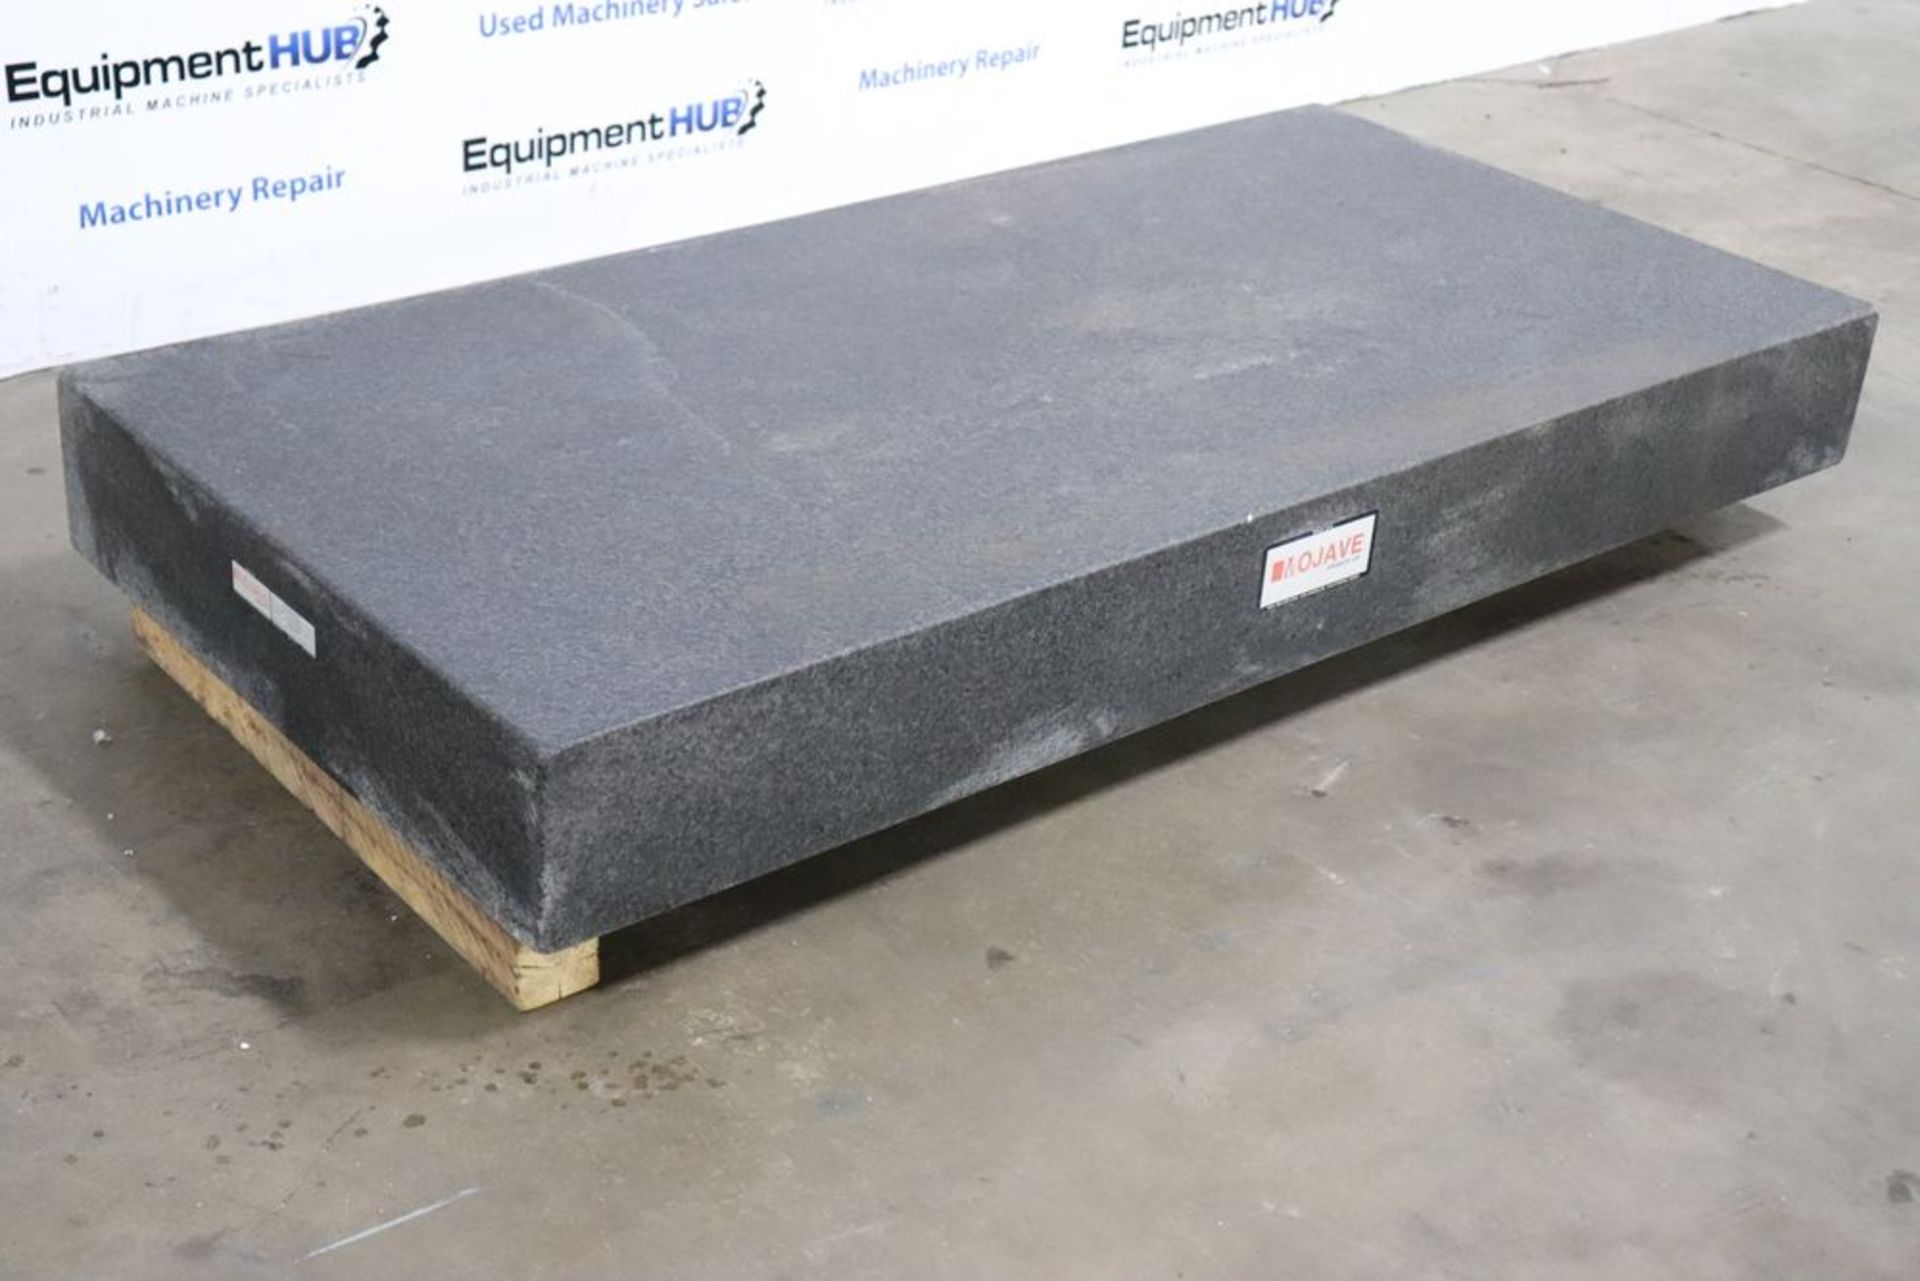 Mojave 72″ x 36″ x 8″ Granite Surface Inspection Plate - Image 3 of 5